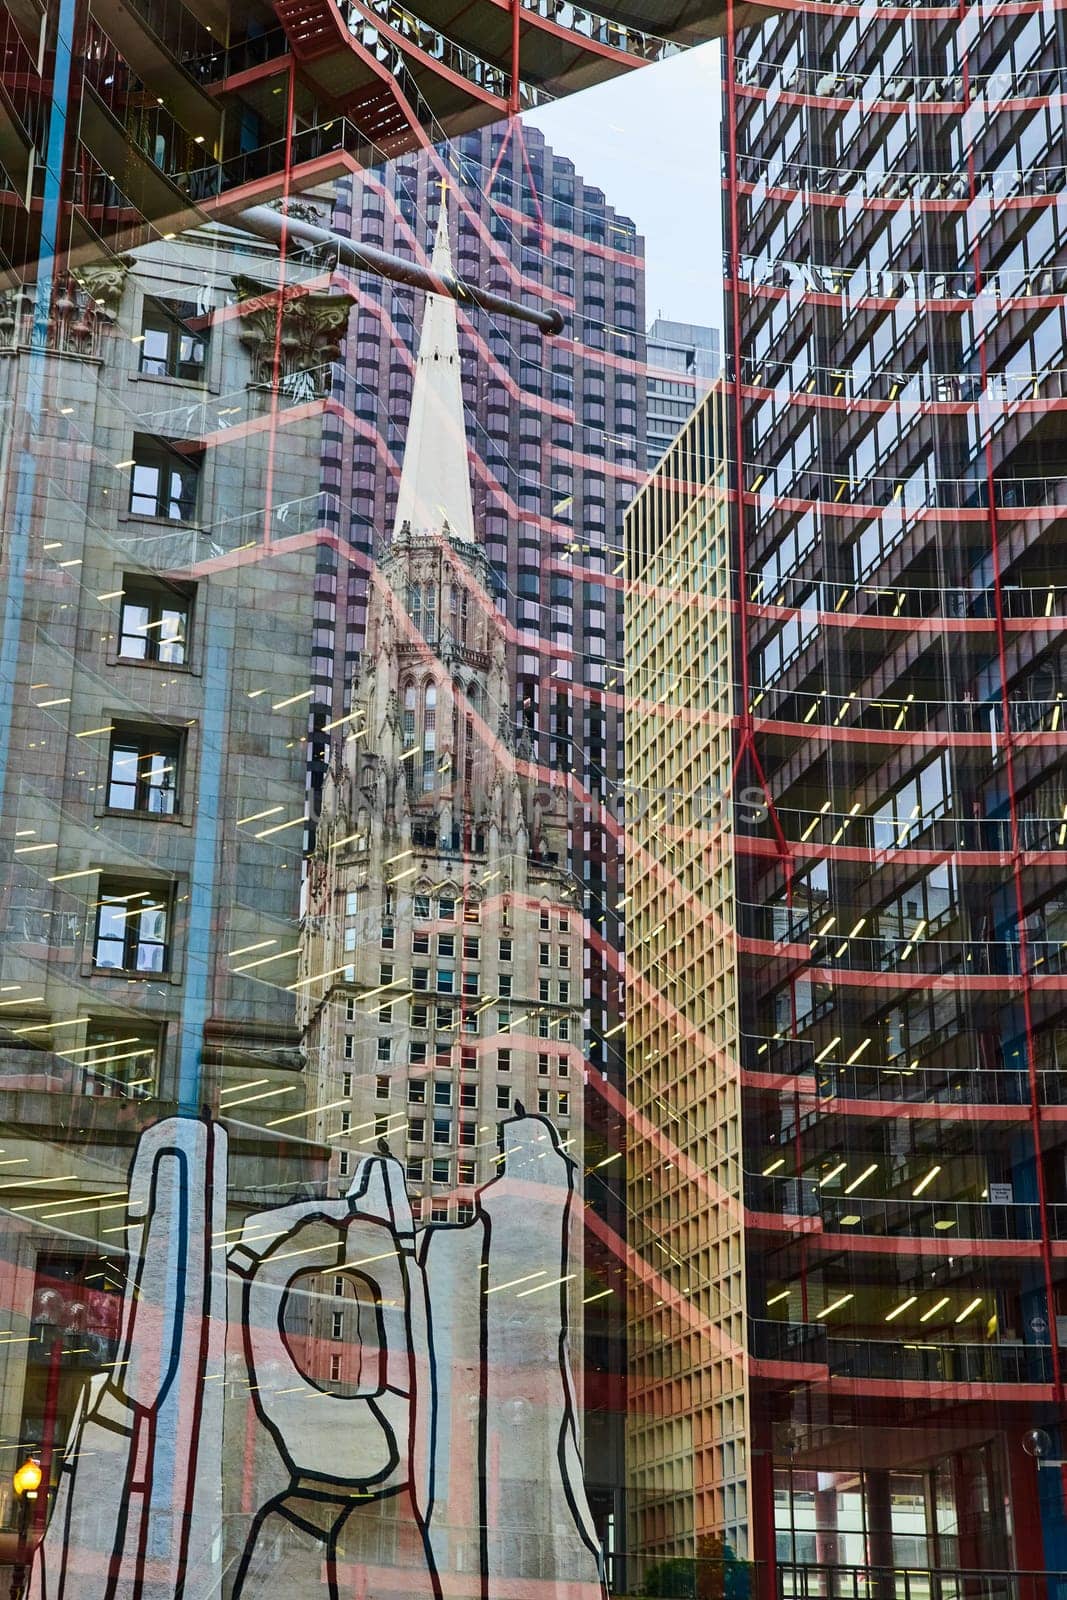 Image of Reflection of interior floors of building with city skyscrapers, Chicago, James R Thompson